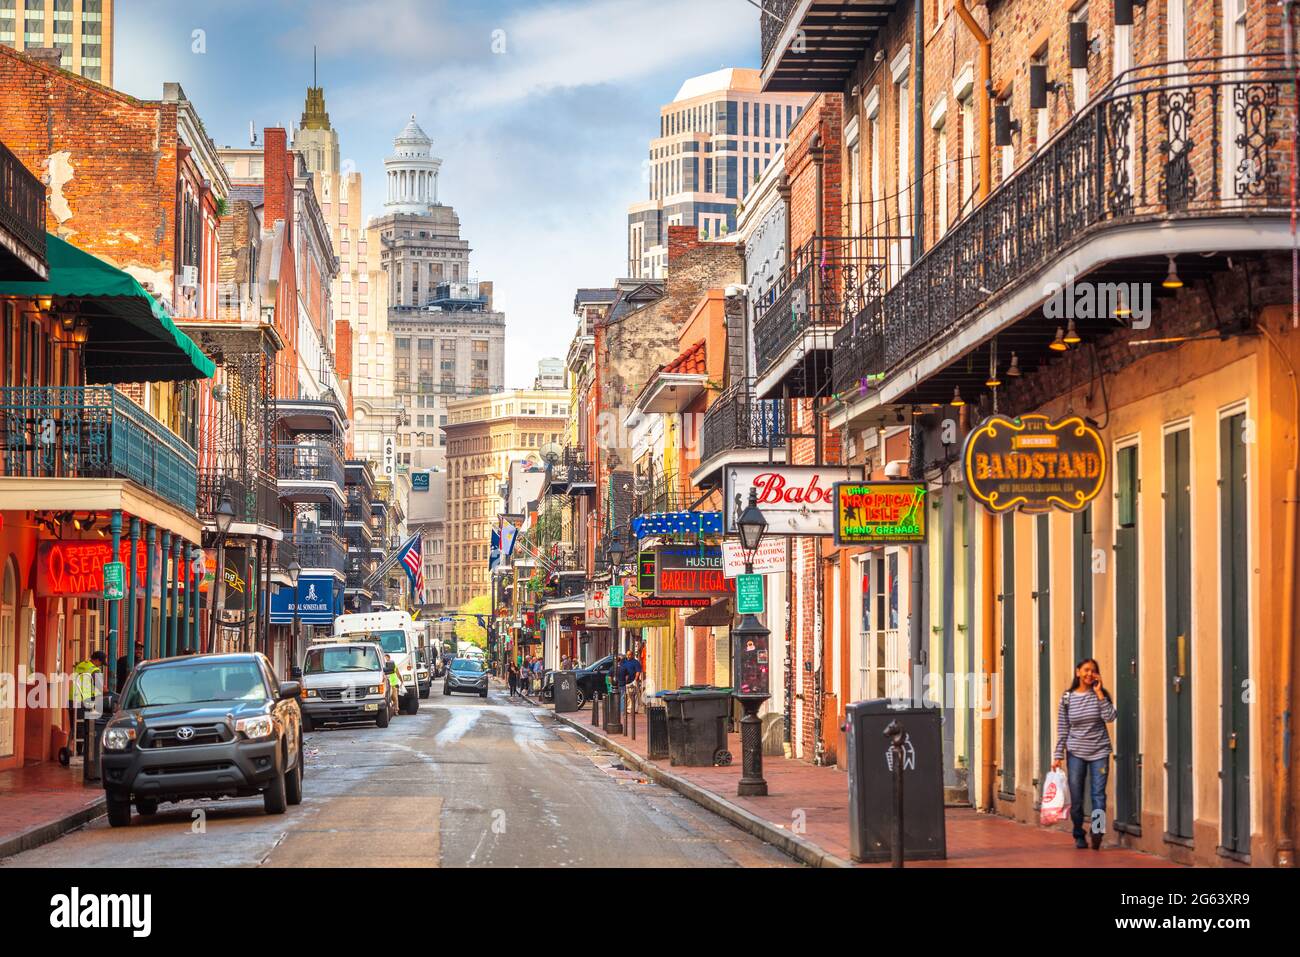 NEW ORLEANS, LOUISIANA - MAY 10, 2016: Traffic and pedestrians on Bourbon Street in the day. The historic street is the heart of the French Quarter. Stock Photo